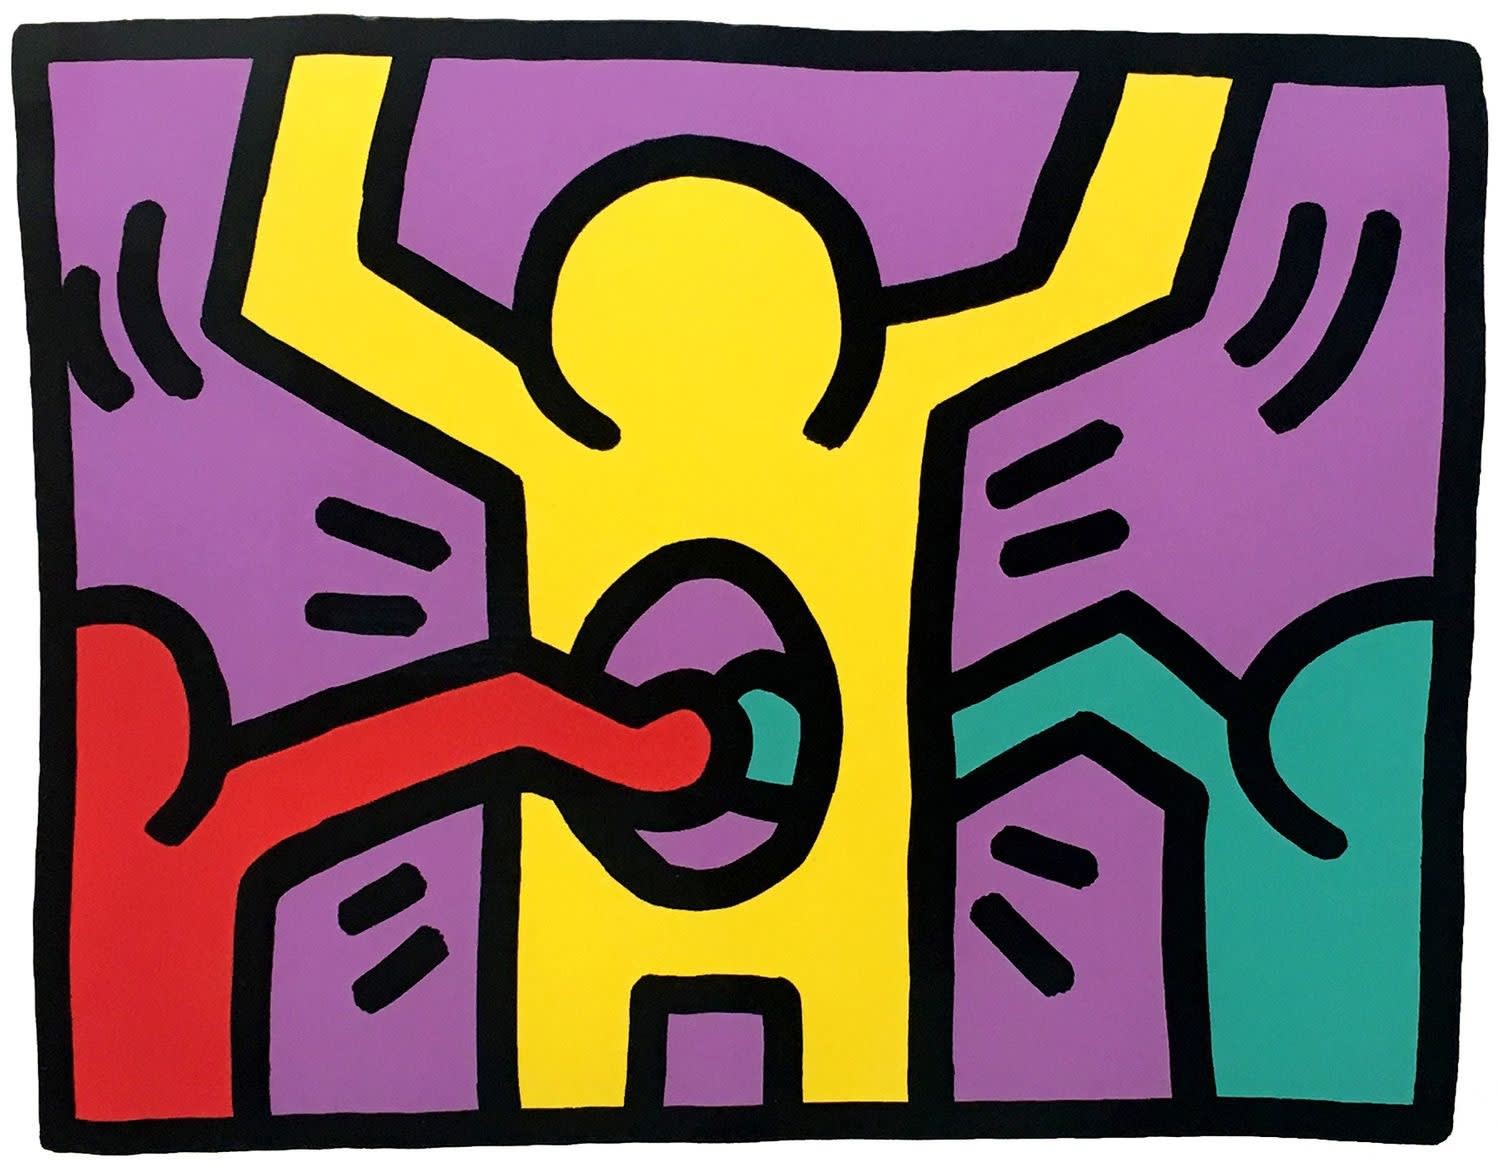 Pop Shop 1, by Keith Haring, 1987